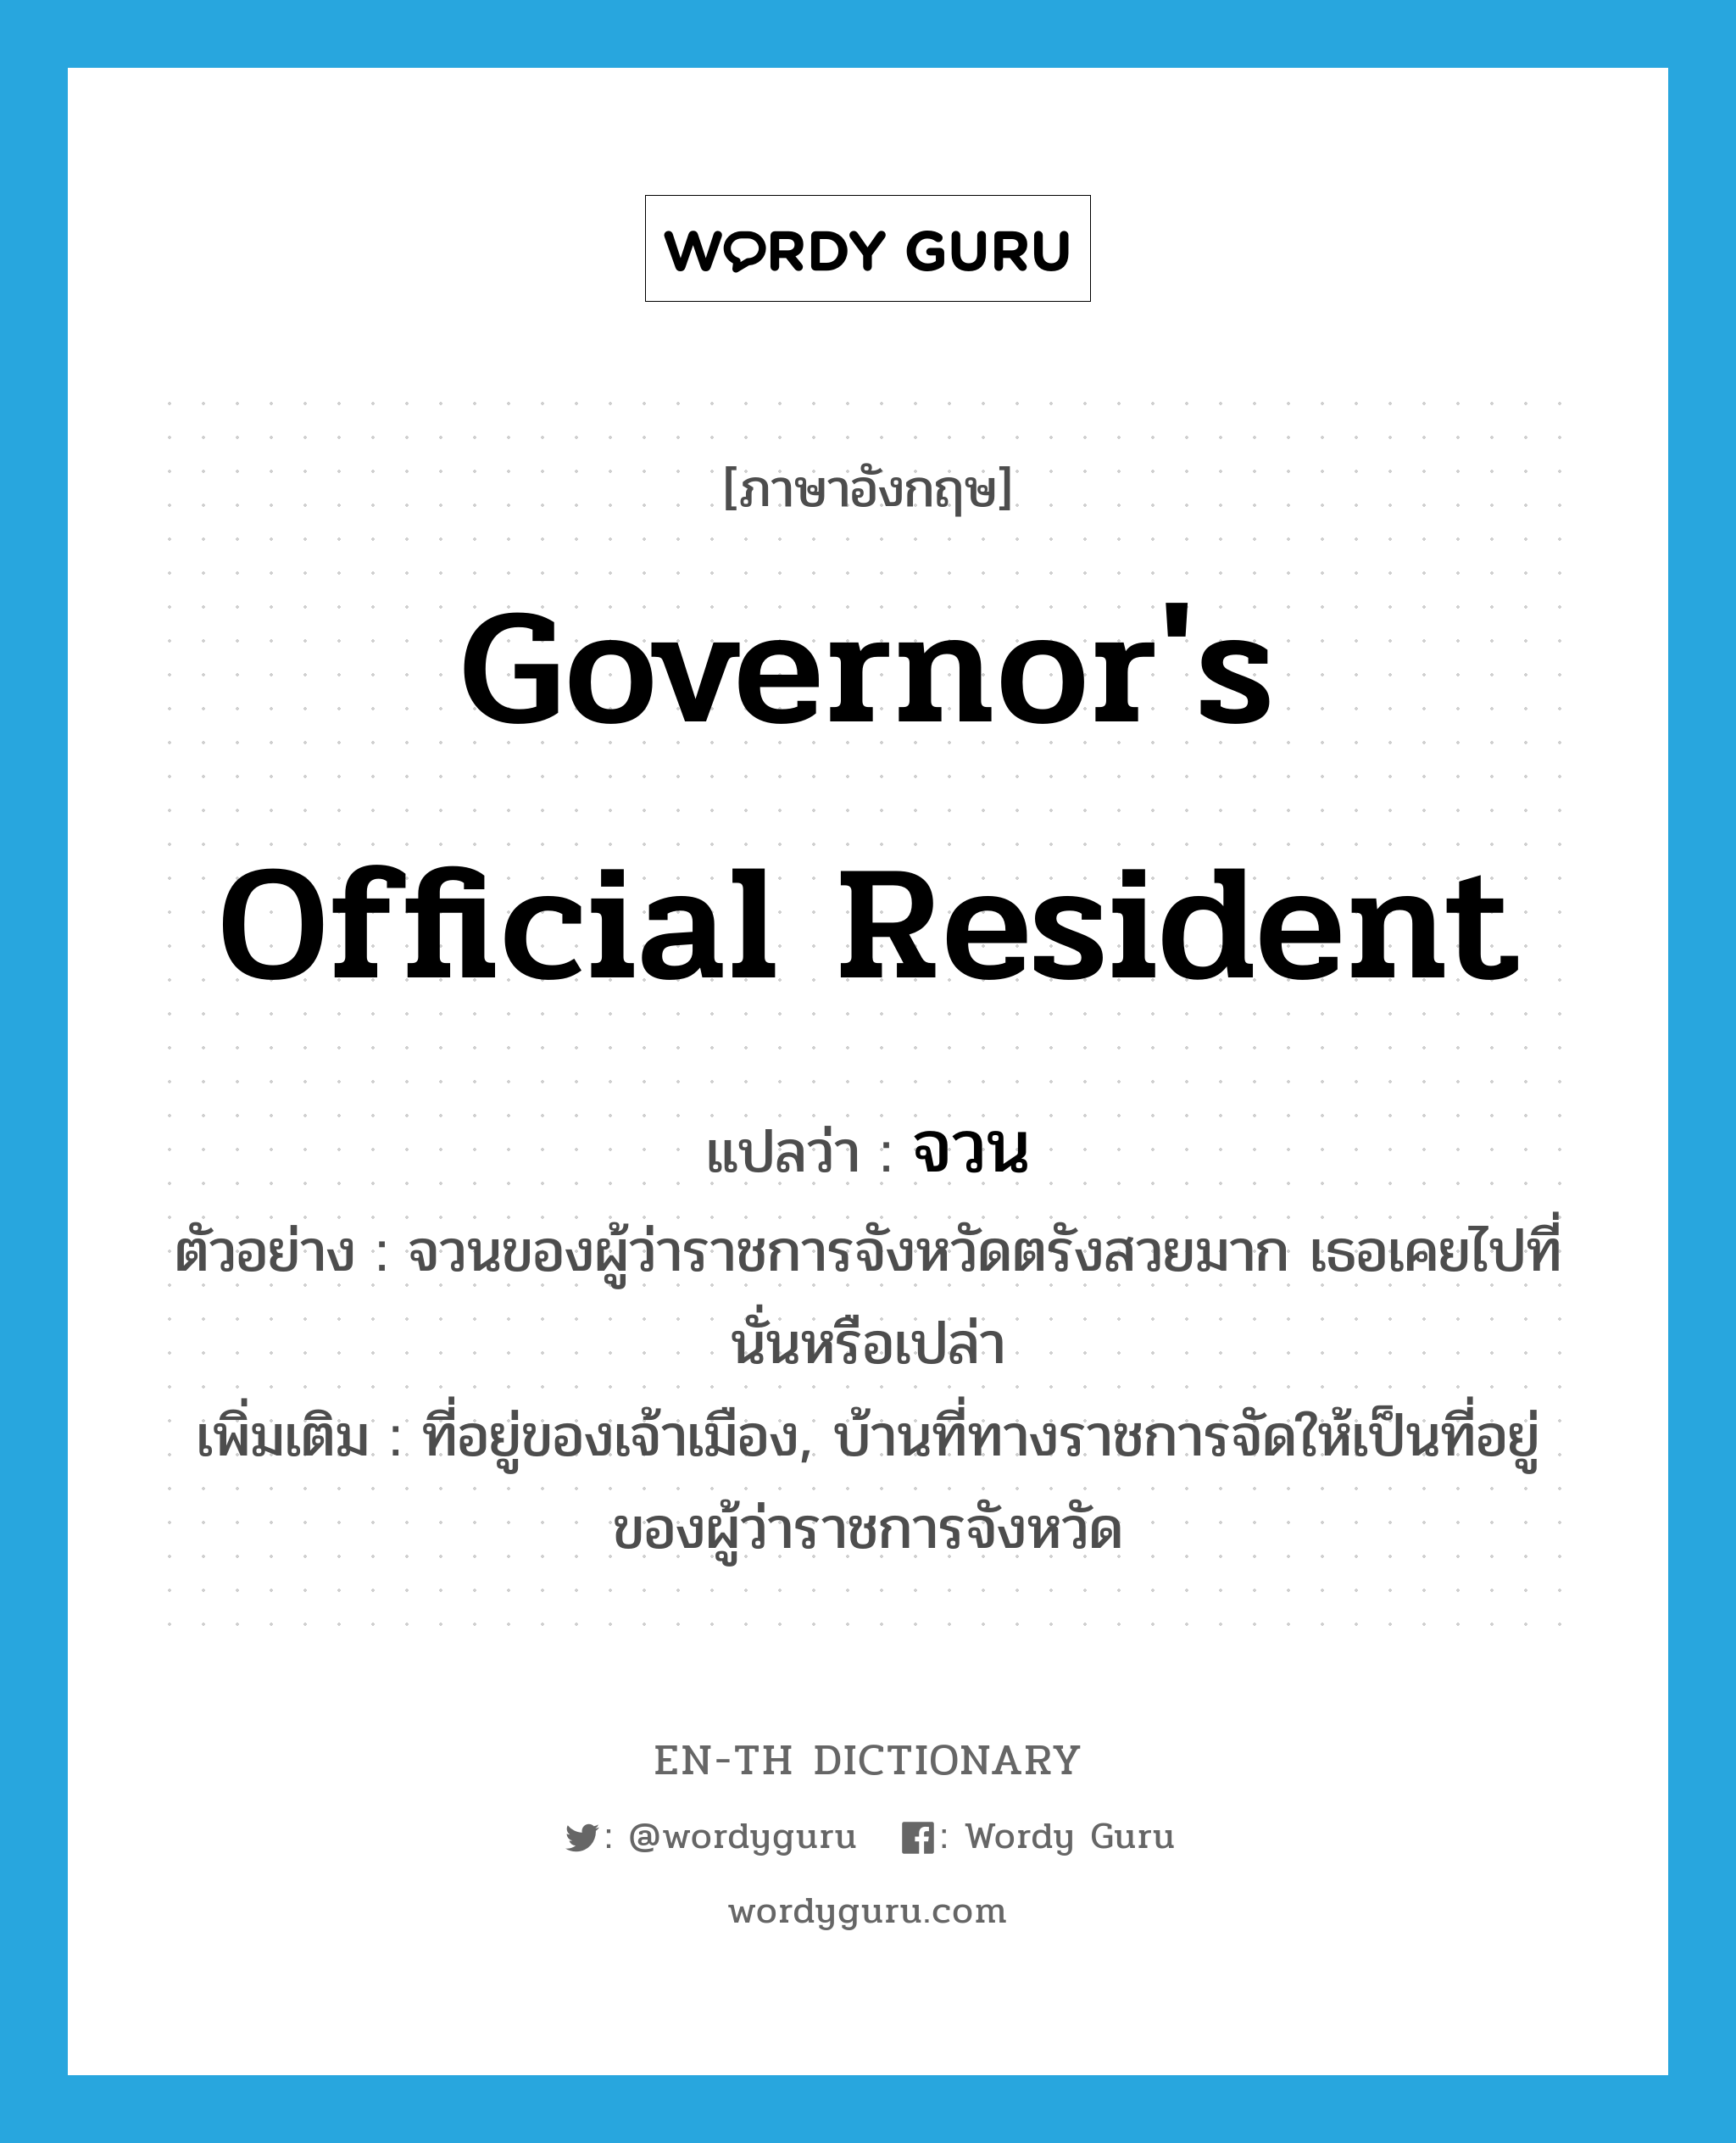 Governor'S Official Resident แปลว่า? | Wordy Guru